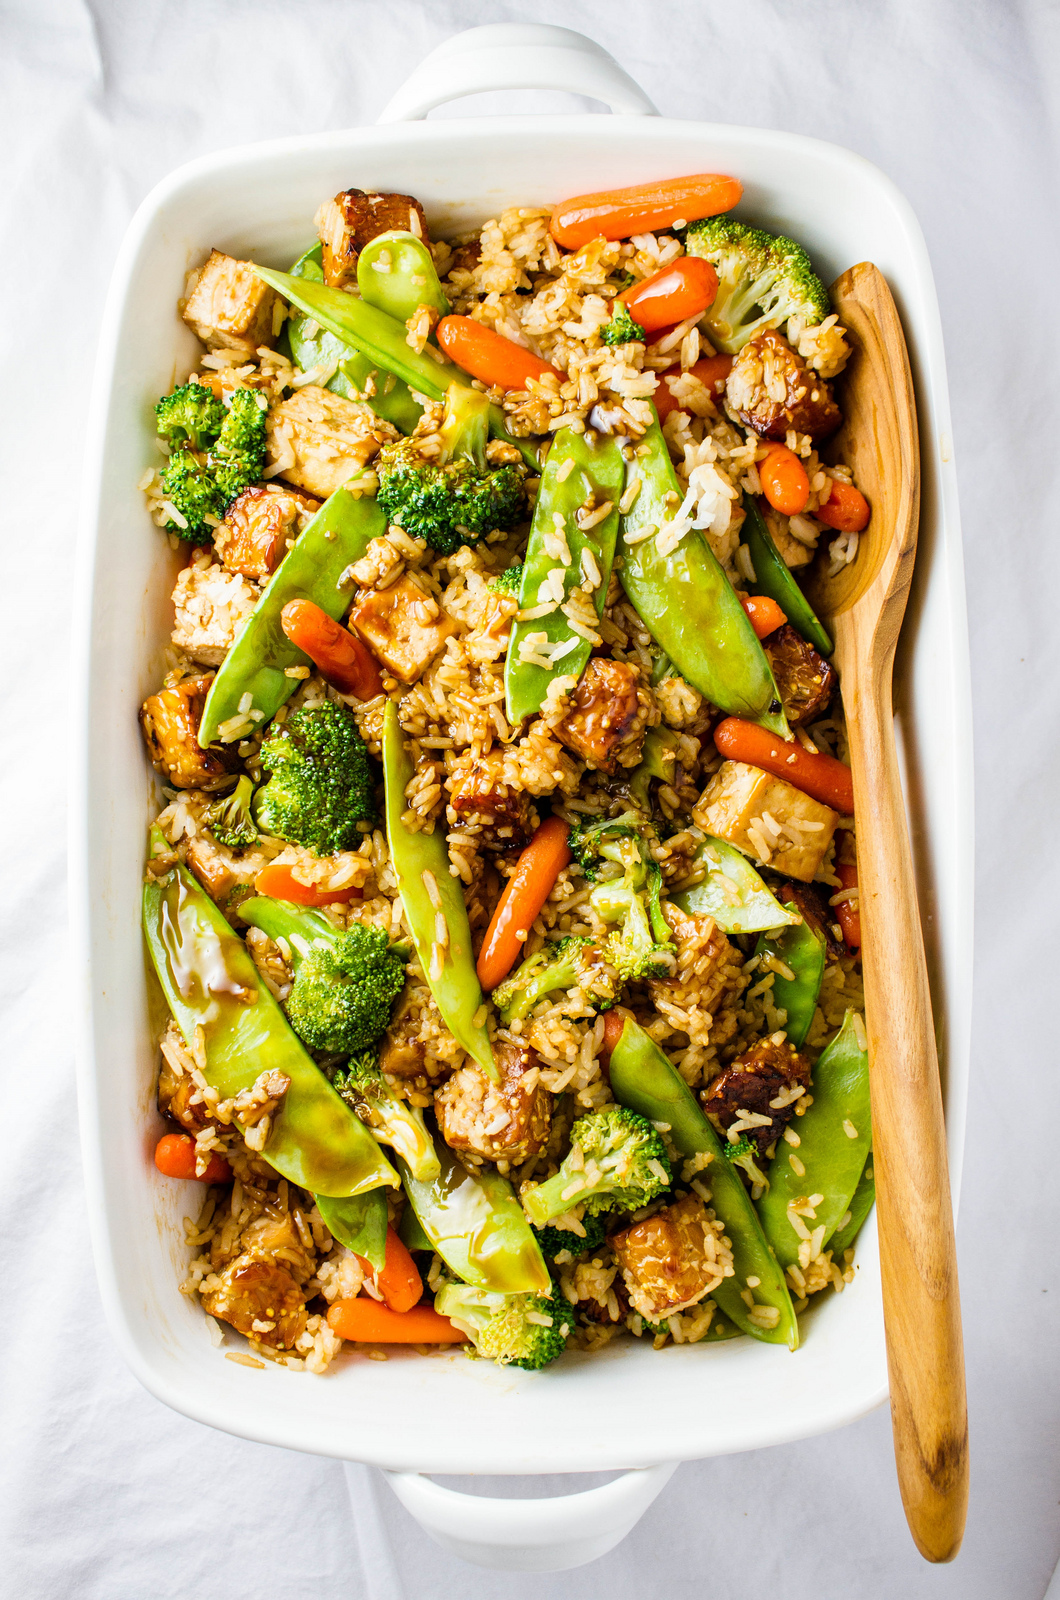 Discover the Endless Possibilities of Tempeh in Your Meals